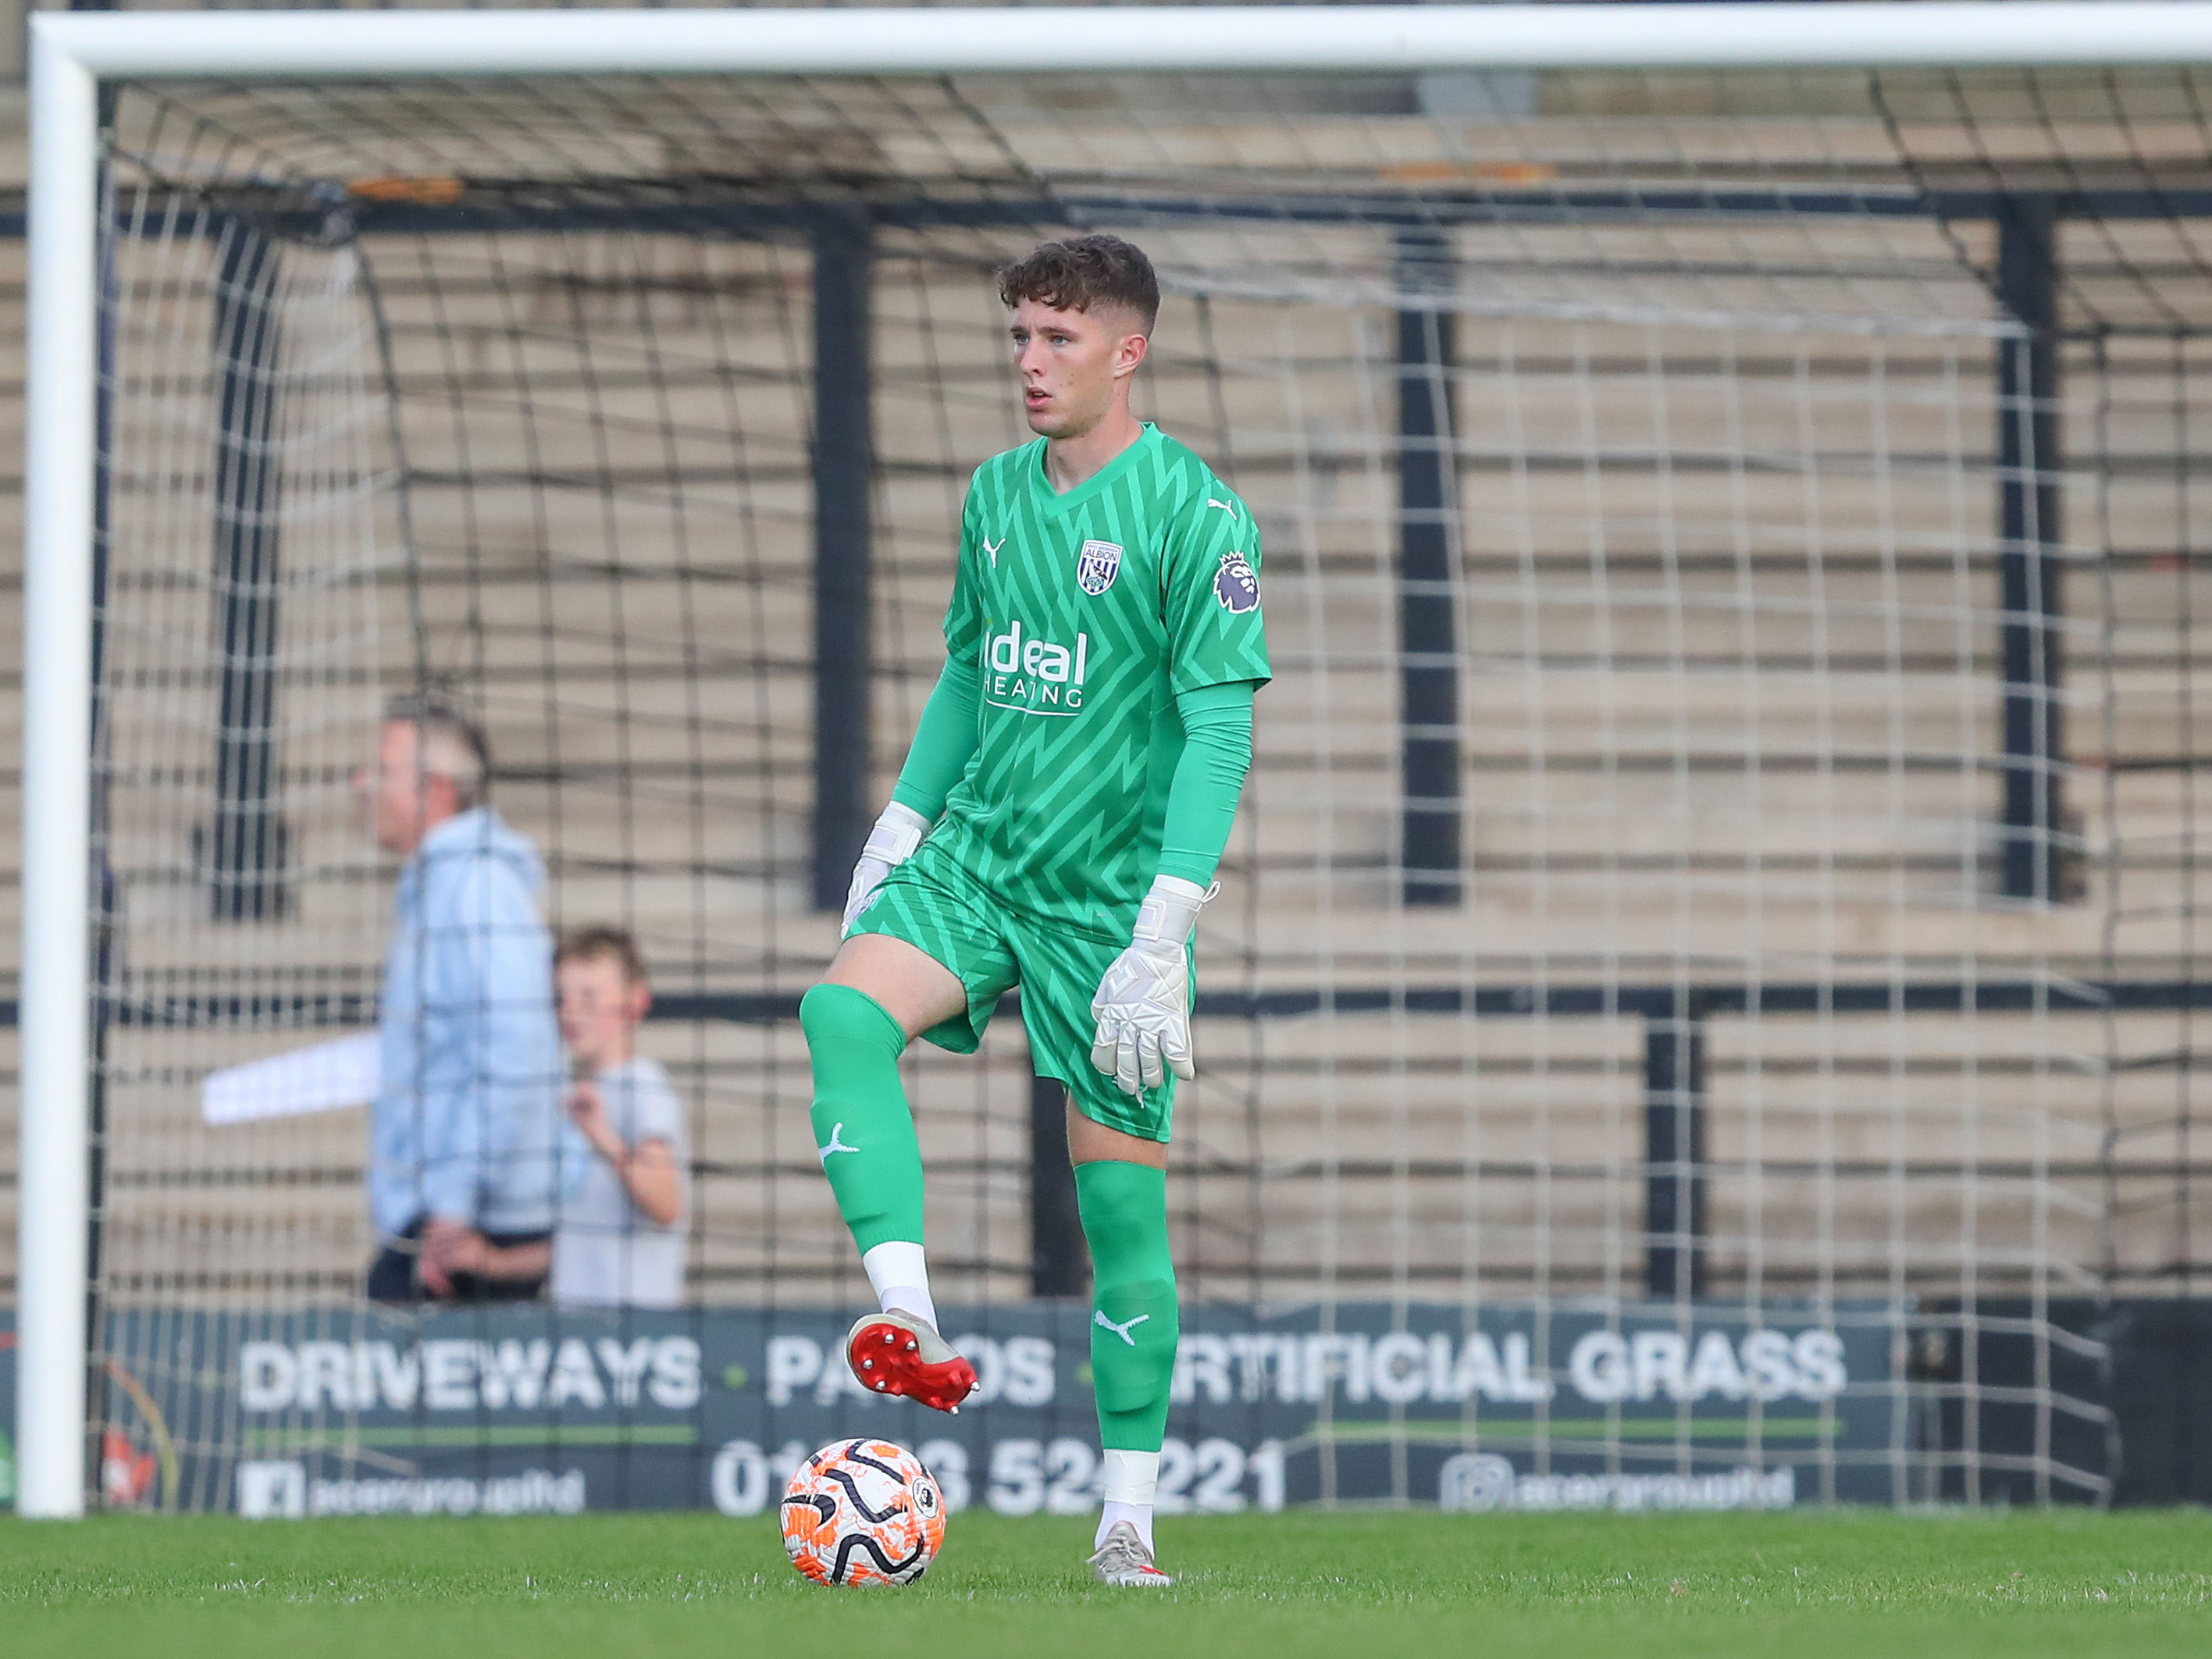 A photo of Ronnie Hollingshead in action for Albion's PL2 team in the 23/24 green goalkeeper kit